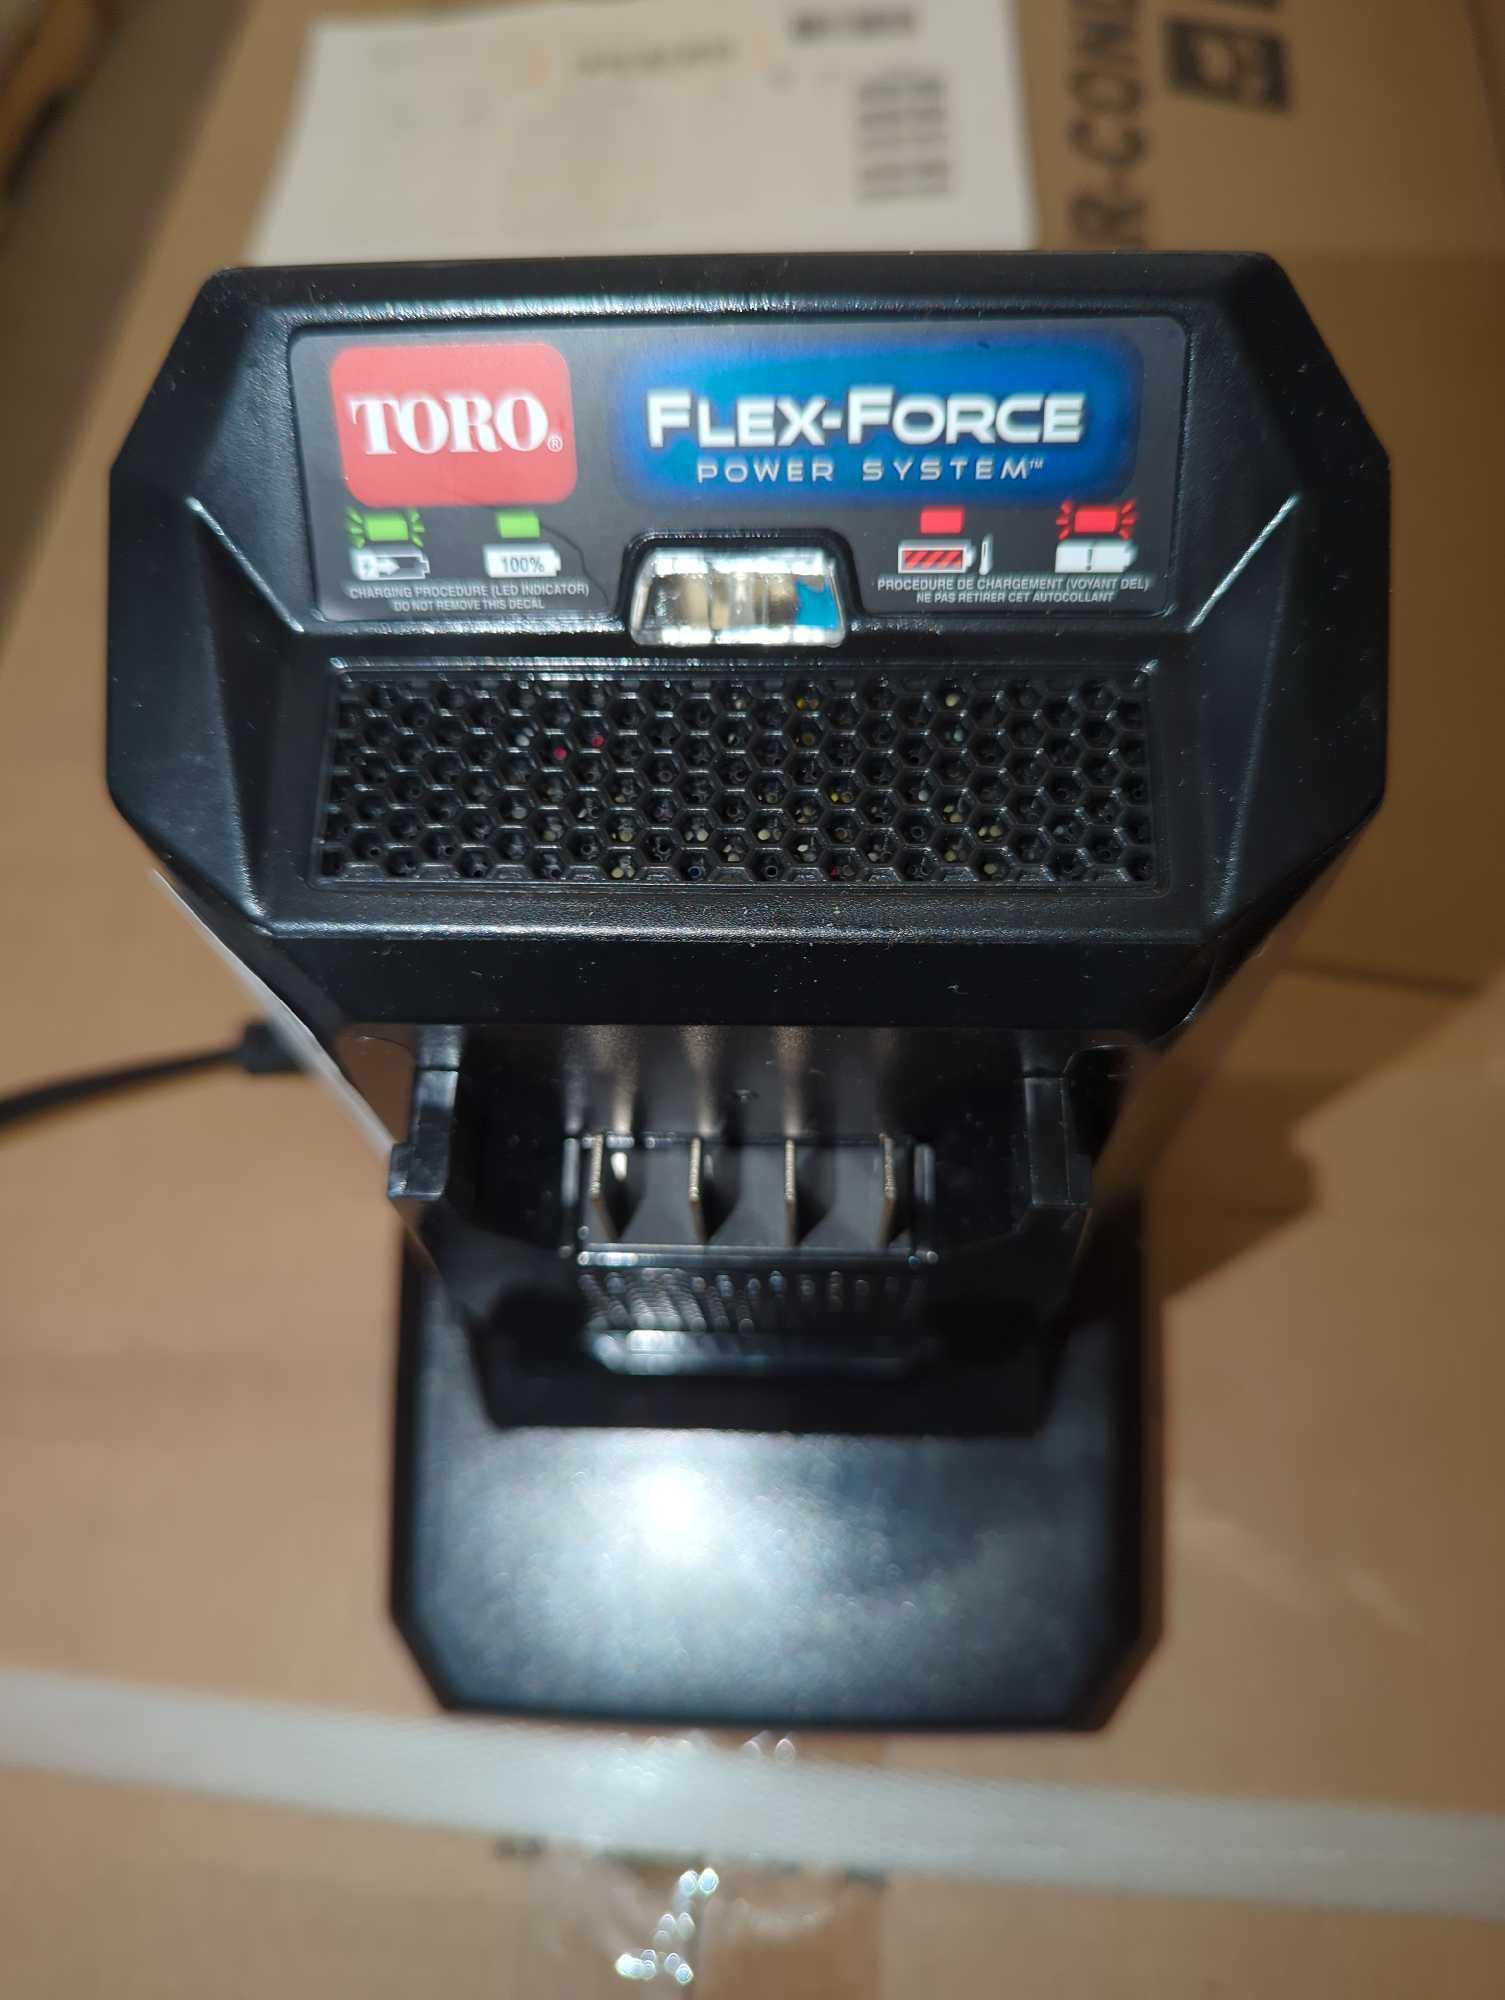 Toro Max Flex-Force 60-Volt Lithium-Ion Battery Charger, Model 88602, Retail Price $83, Appears to